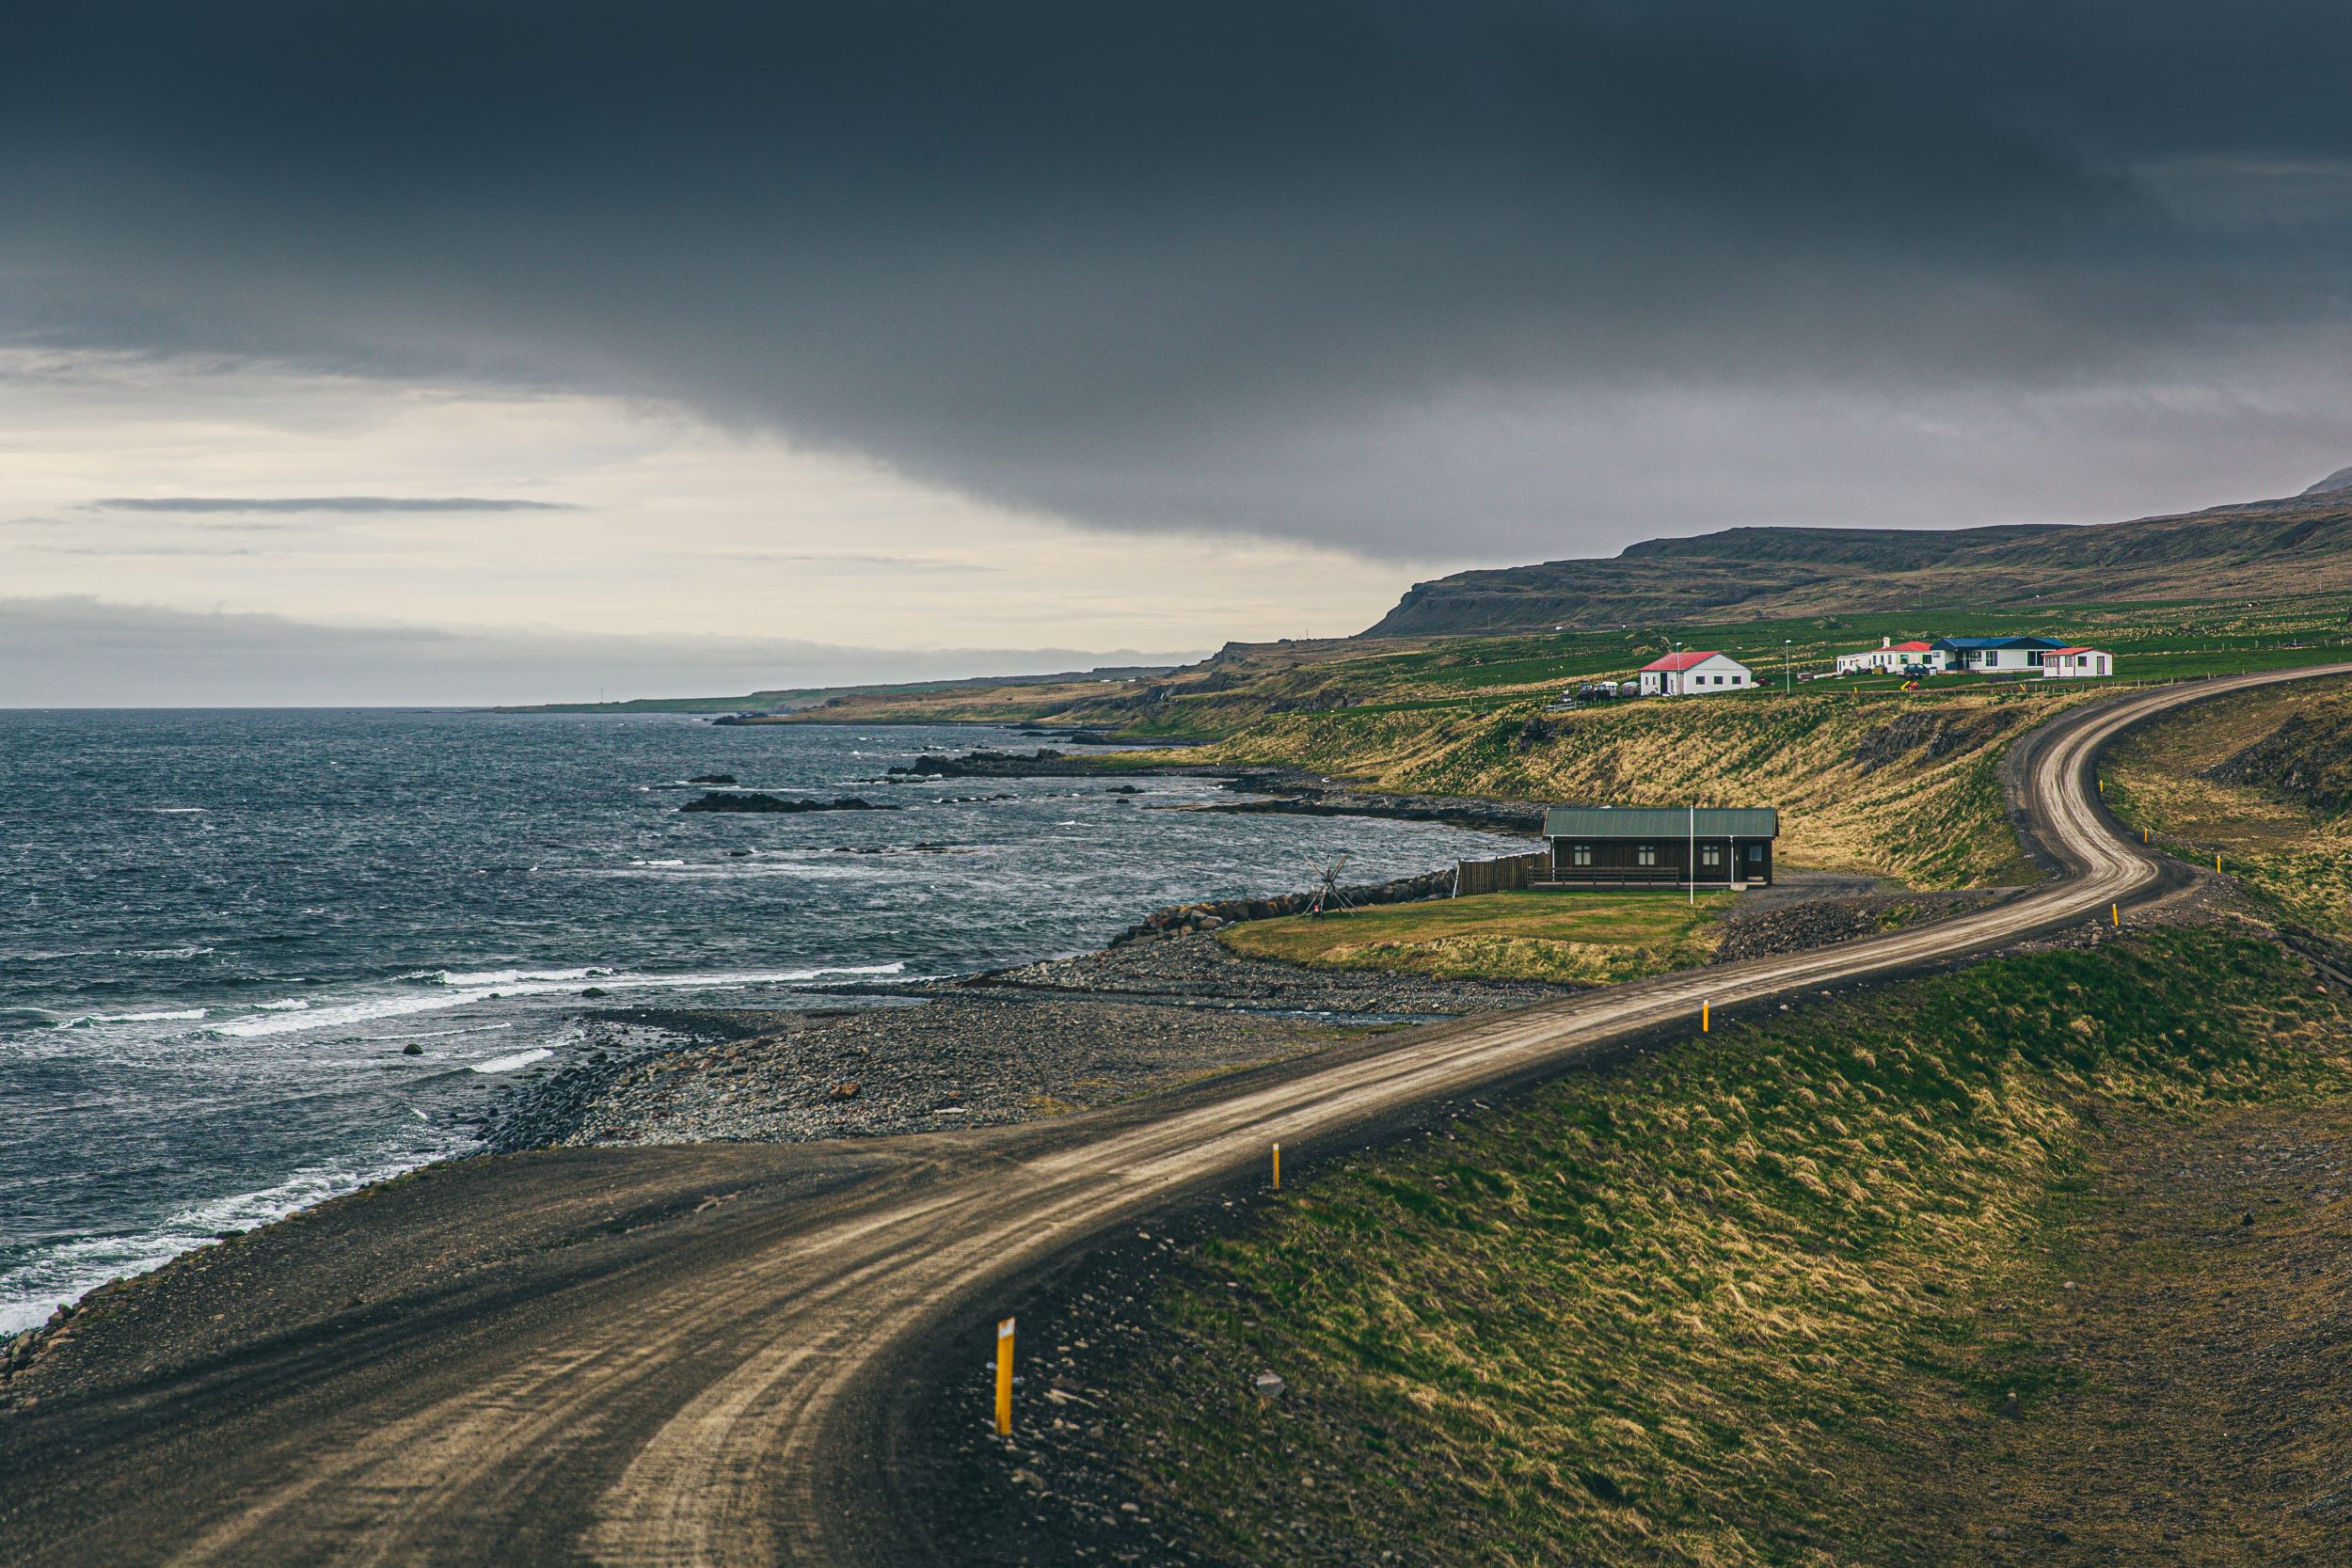 A curvy gravel road next to the ocean, farm houses in the background, cloudy skies.